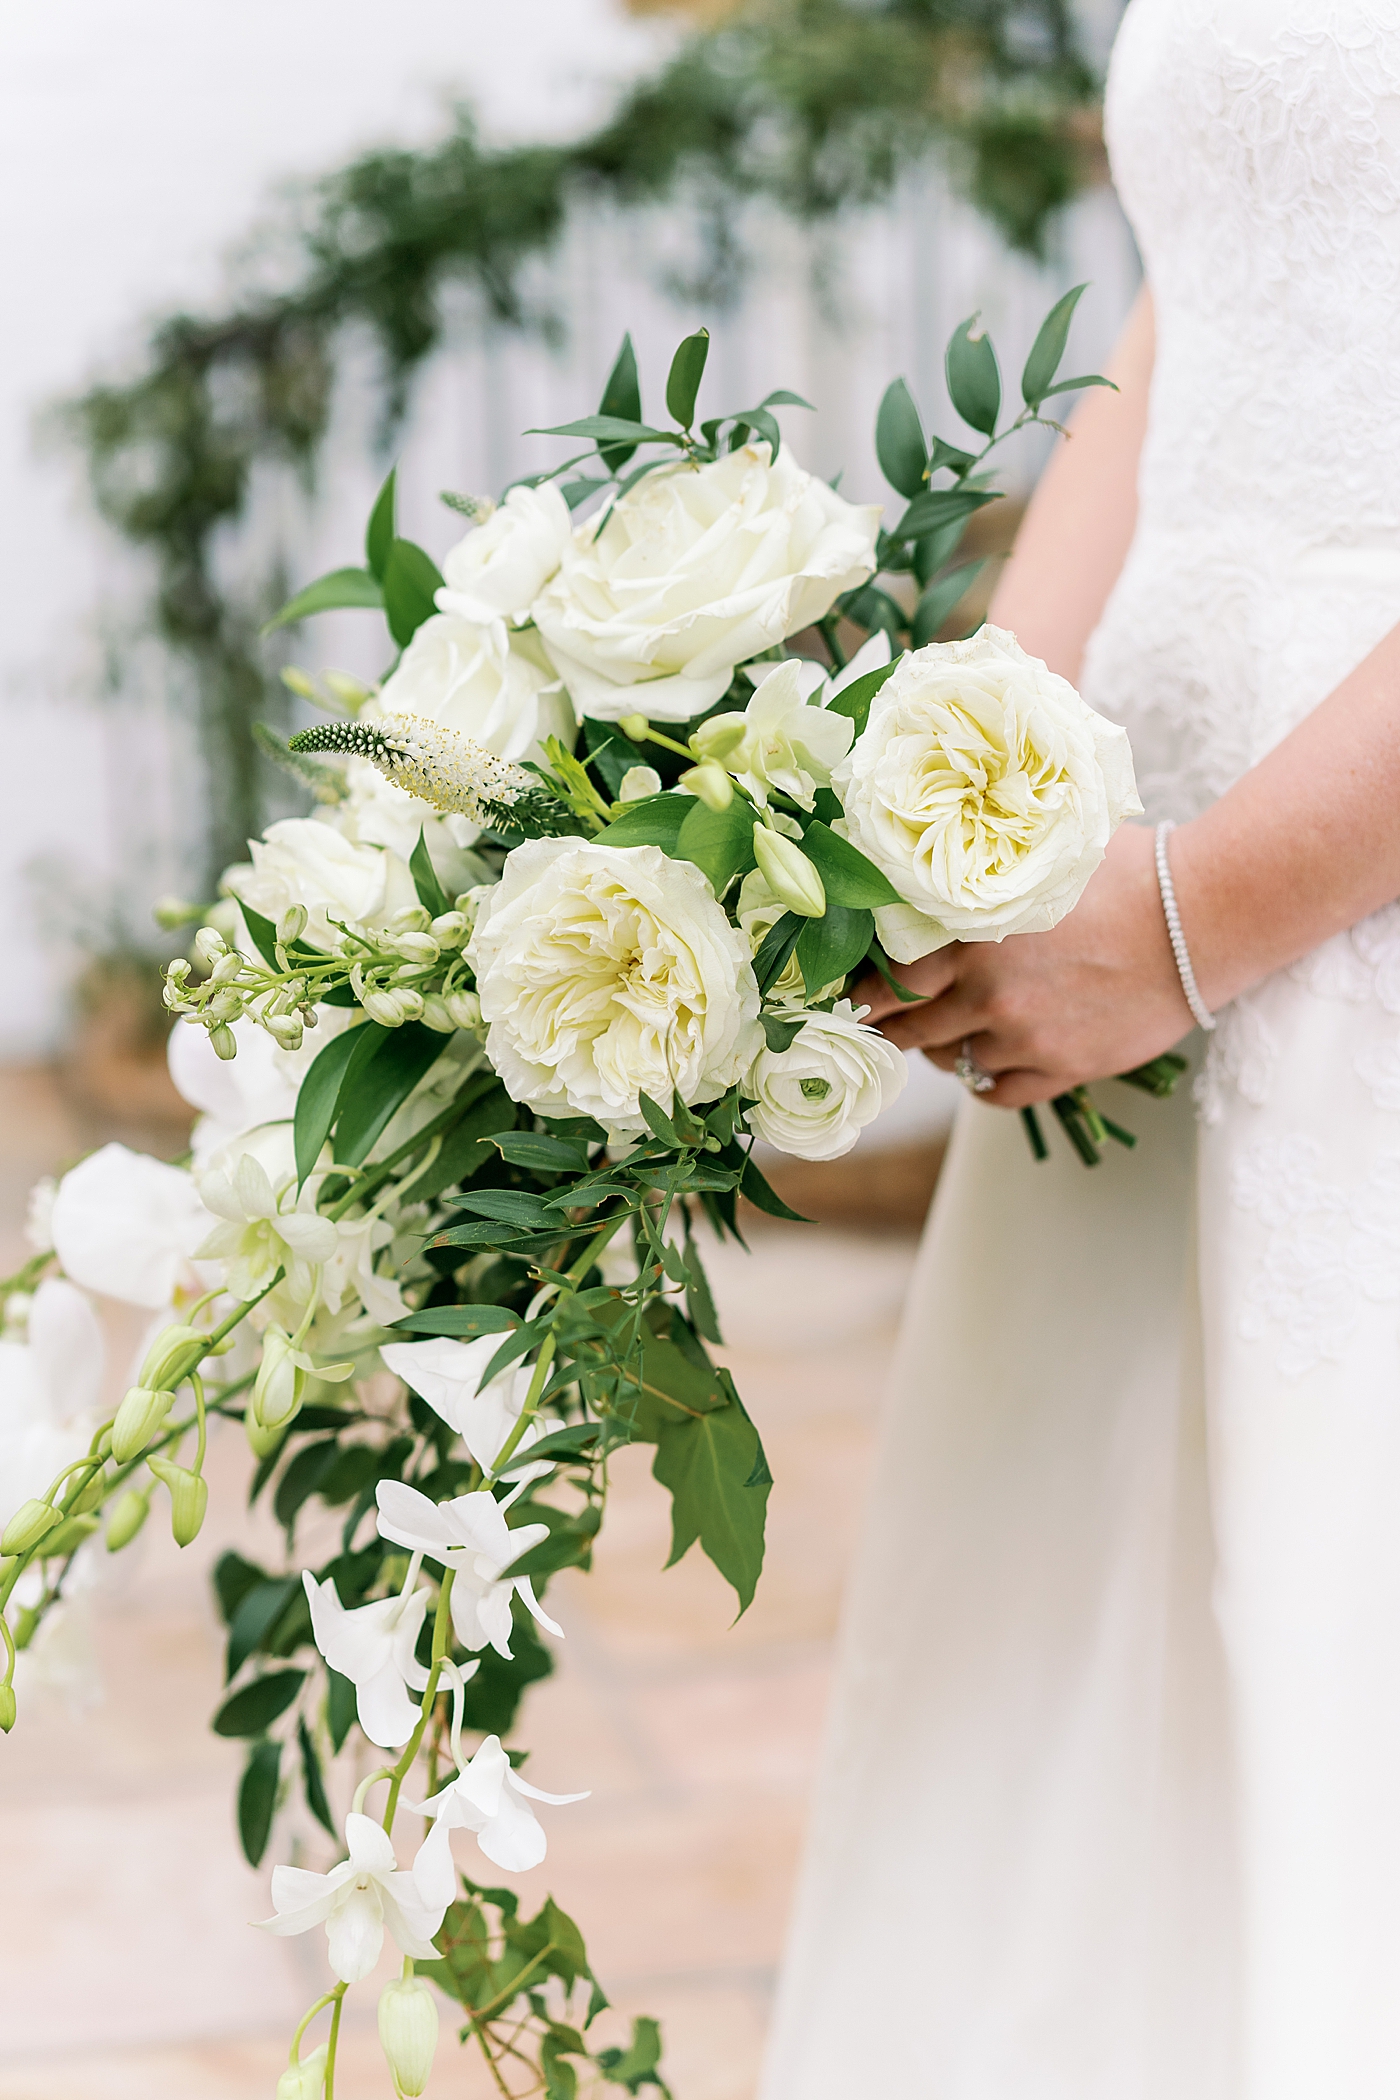 Bride holding her bouquet with white roses and orchids | Photo by Annie Laura Photography